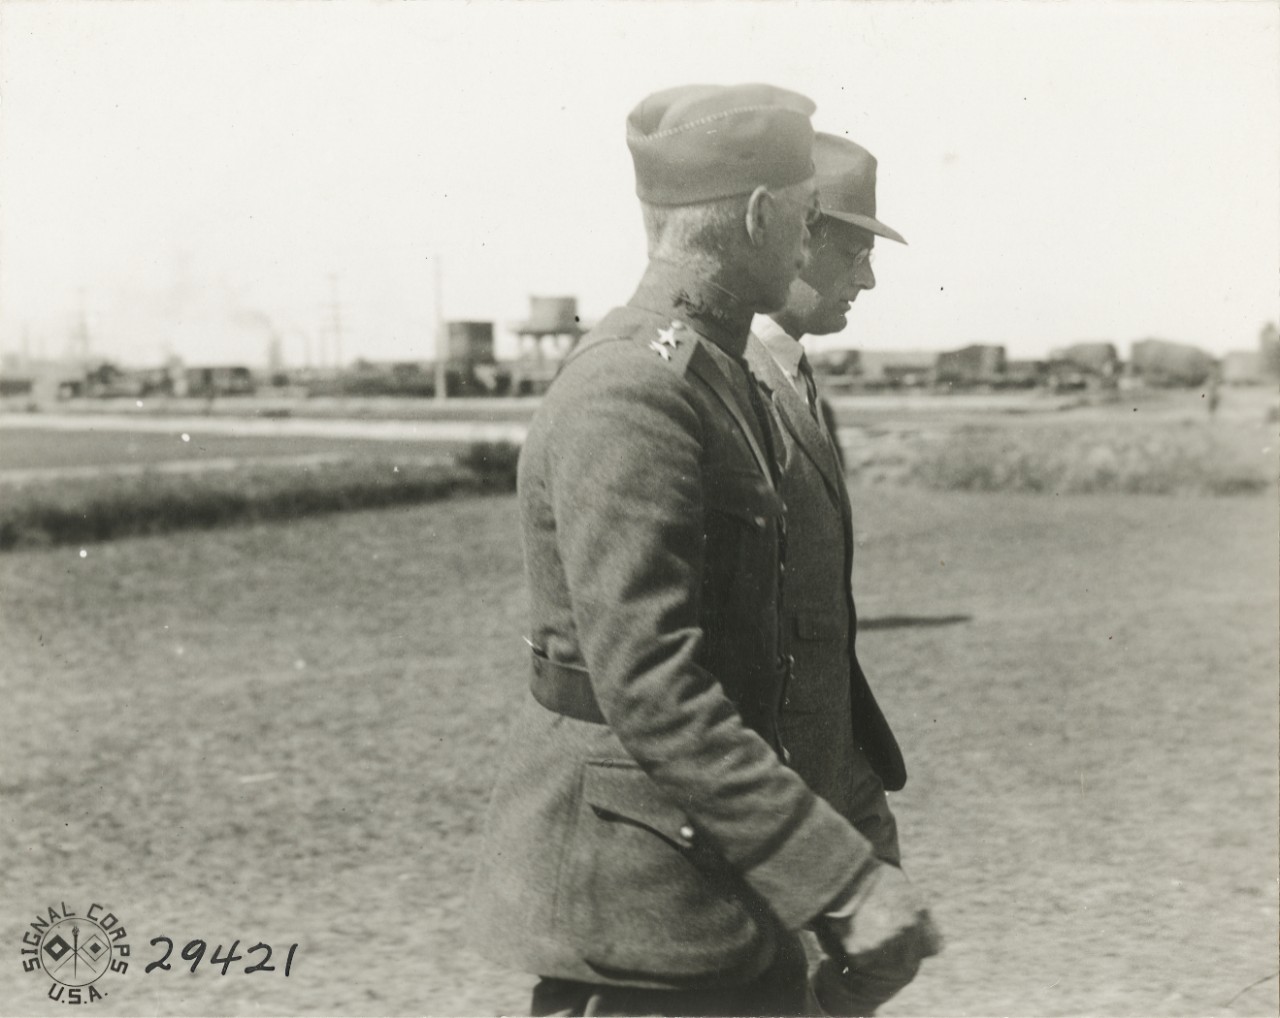 <p>111-SC-29421: Rear Admiral Charles P. Plunkett, USN, and Franklin D. Roosevelt, Assistant Secretary of the Navy on a tour of inspection of U.S. Naval Railway Battery, Montoir, France. Photographed by Corporal L.H. McLaughlin, SC, August 1, 1918. U.S. Army Signal Corps Photograph, now in the collections of the National Archives. Archival photograph taken by Mr. James Poynor.</p>
